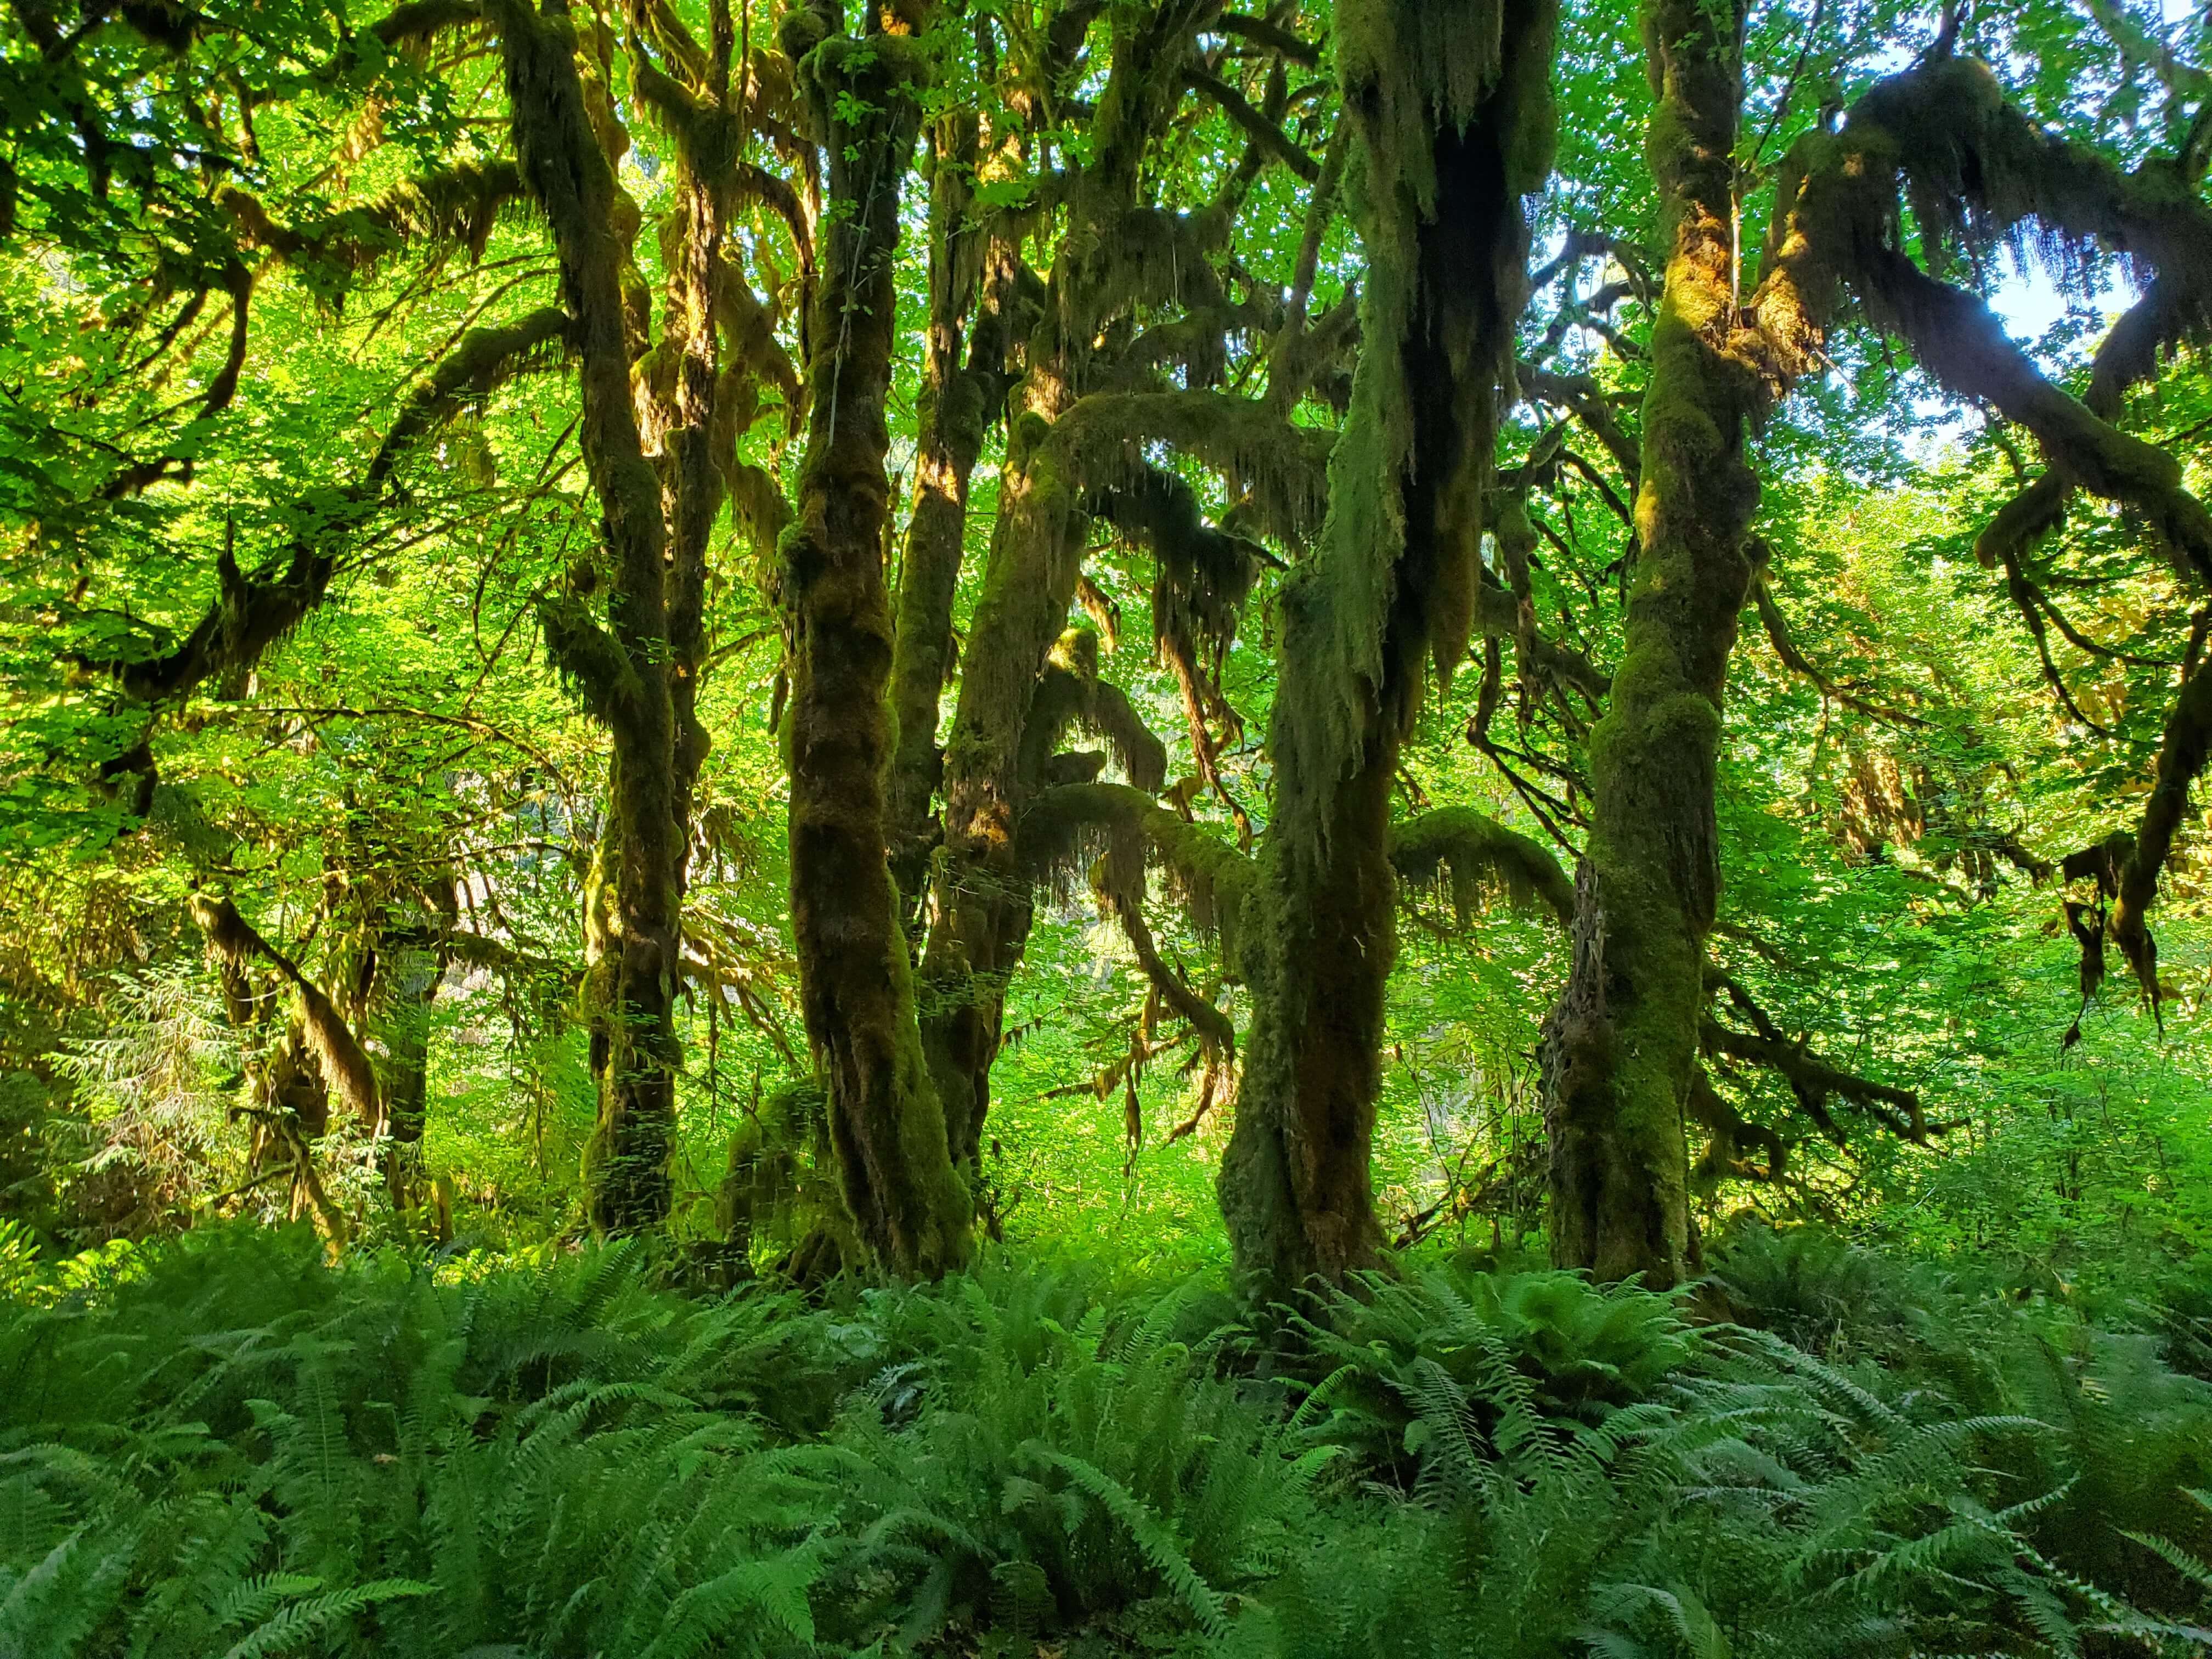 Ferns and mossy trees seen along the Hall of Mosses trail in the Hoh Rain Forest of Olympic National Park